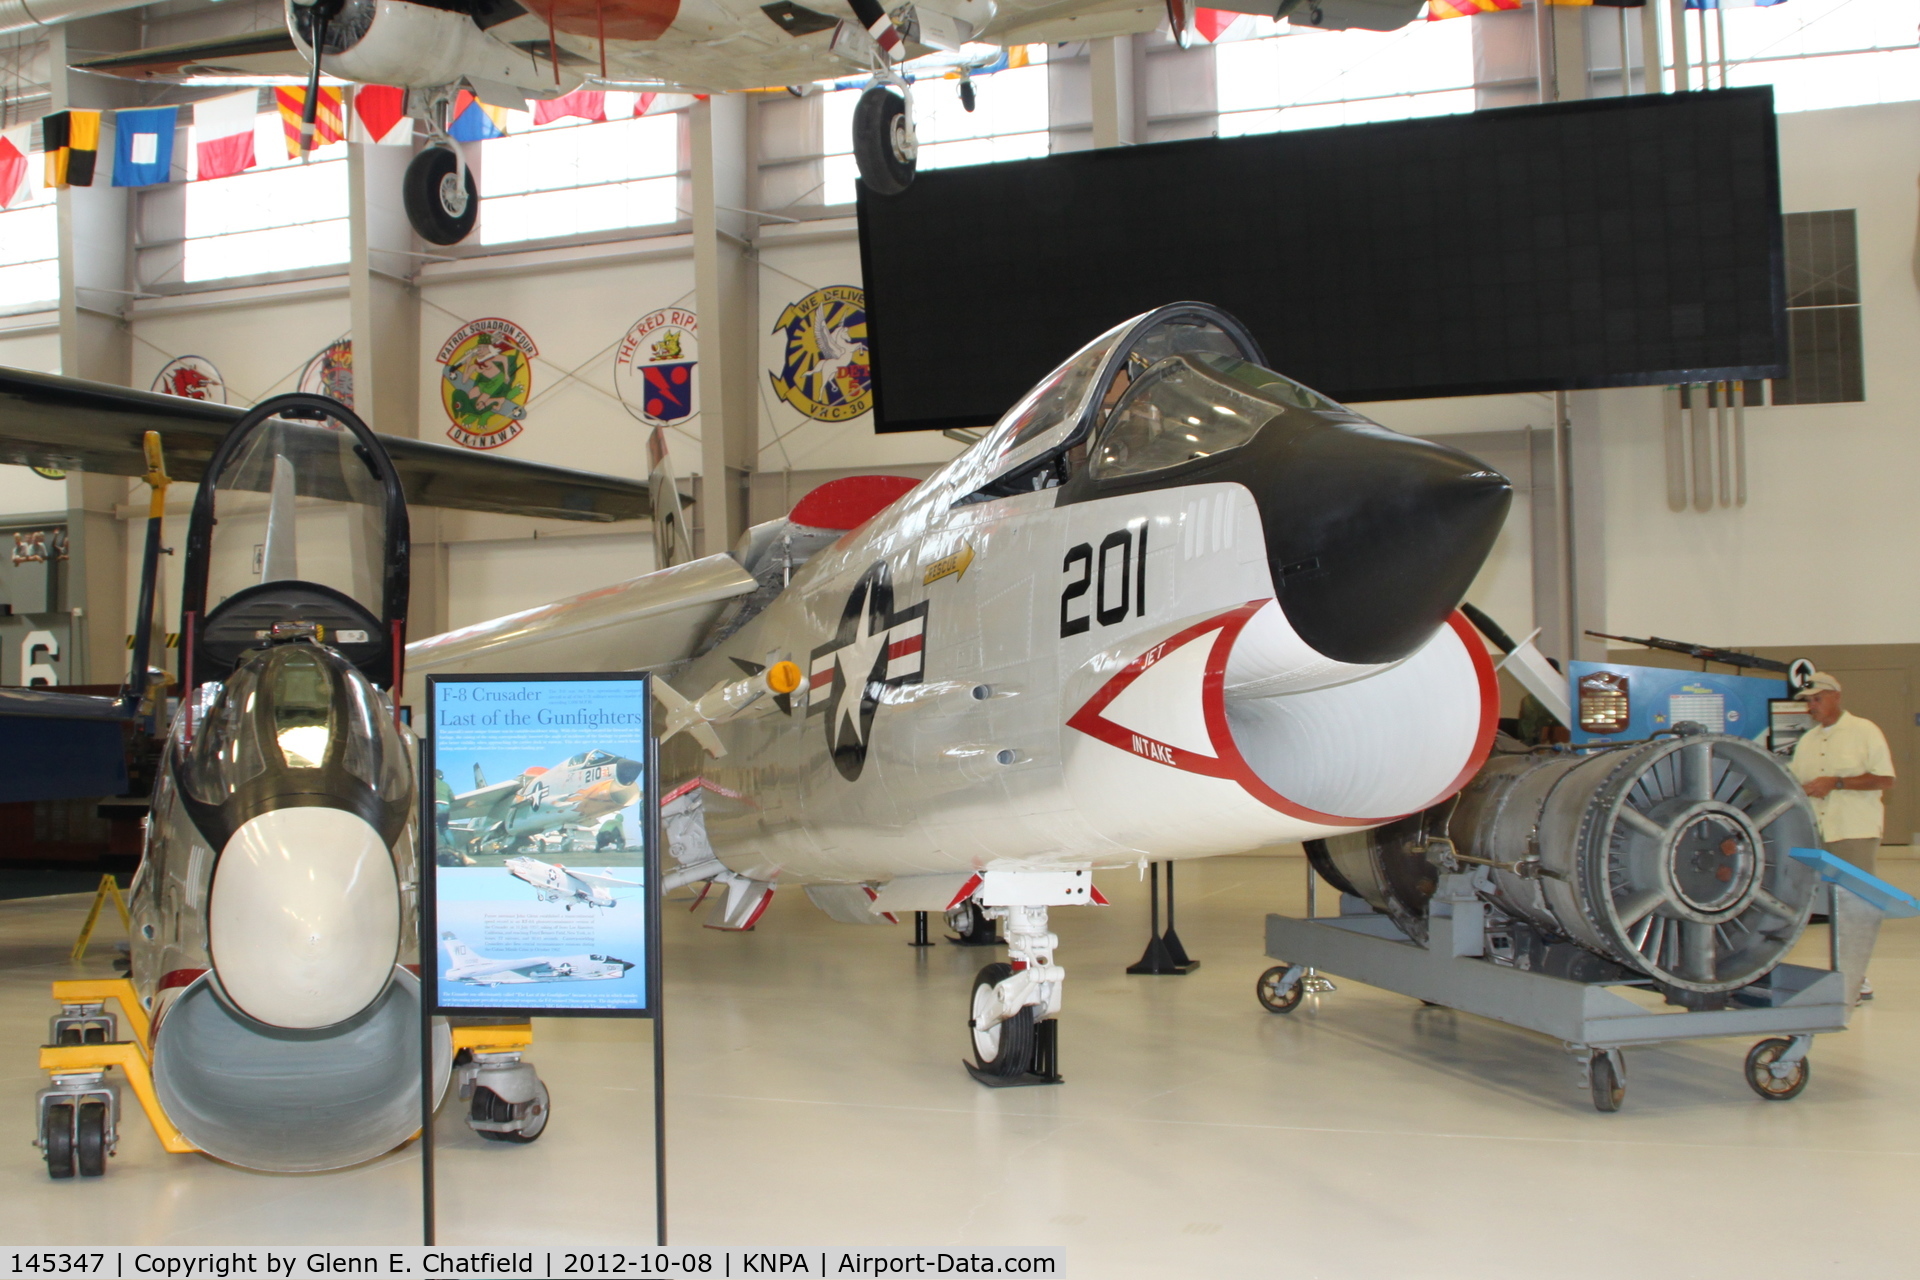 145347, 1957 Vought F-8A Crusader C/N Not found 145347, Naval Aviation Museum